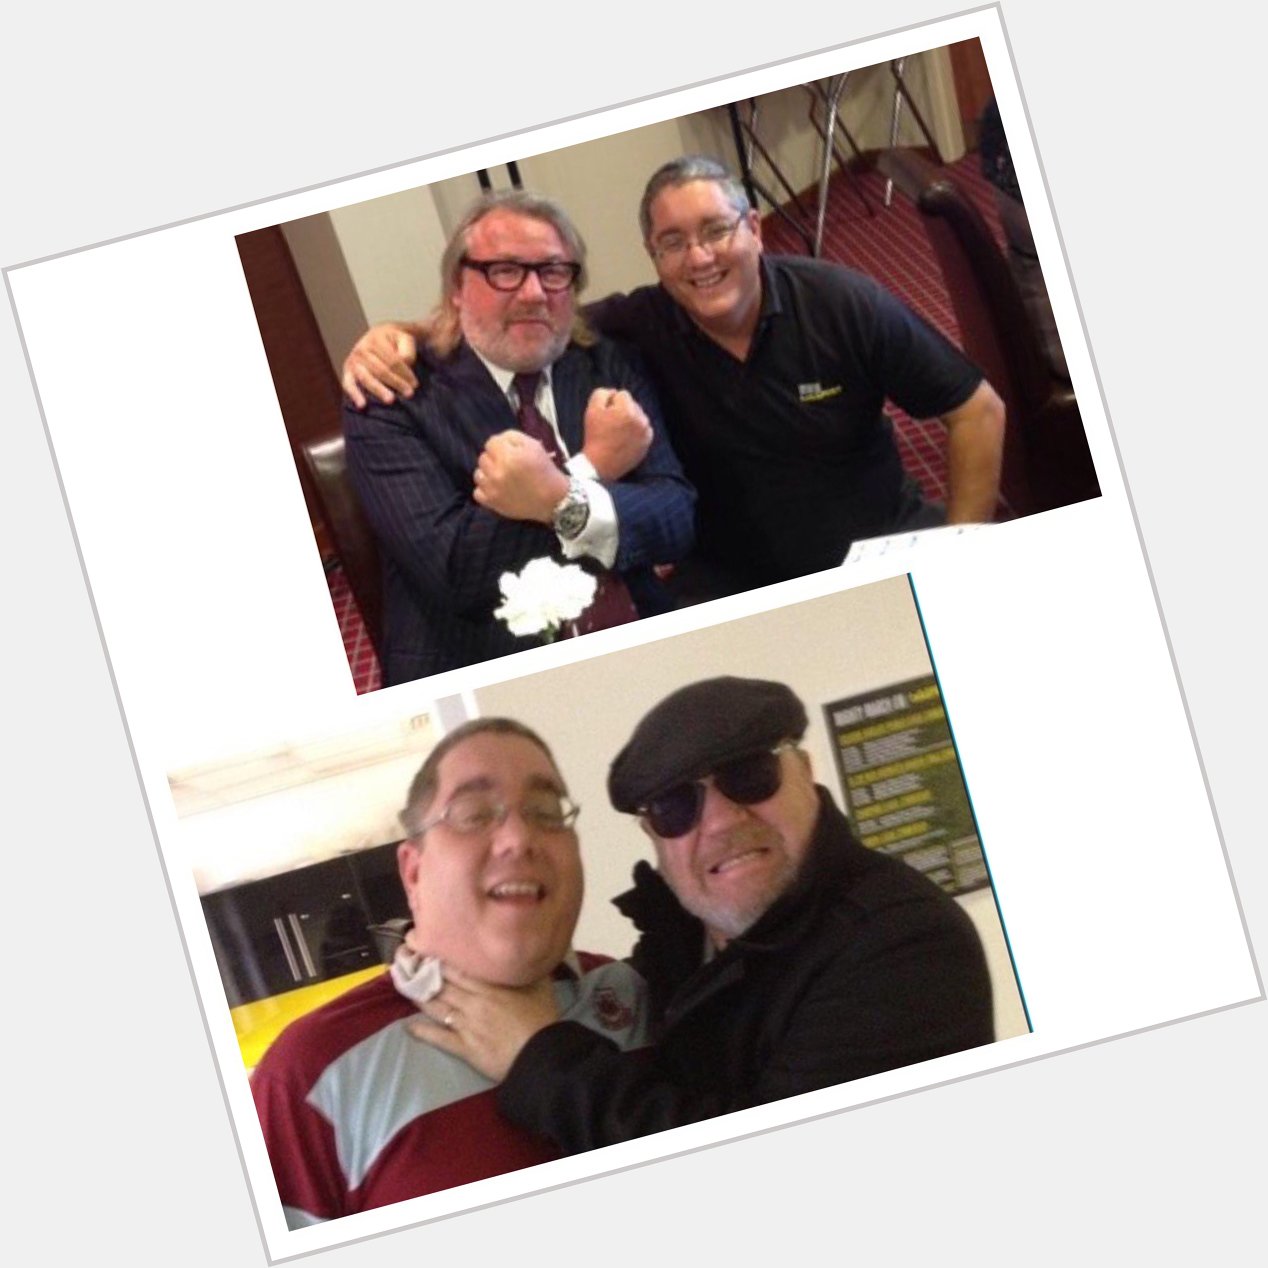 A very happy birthday to celebrity fan Ray Winstone - have a great day & see you next month my friend 